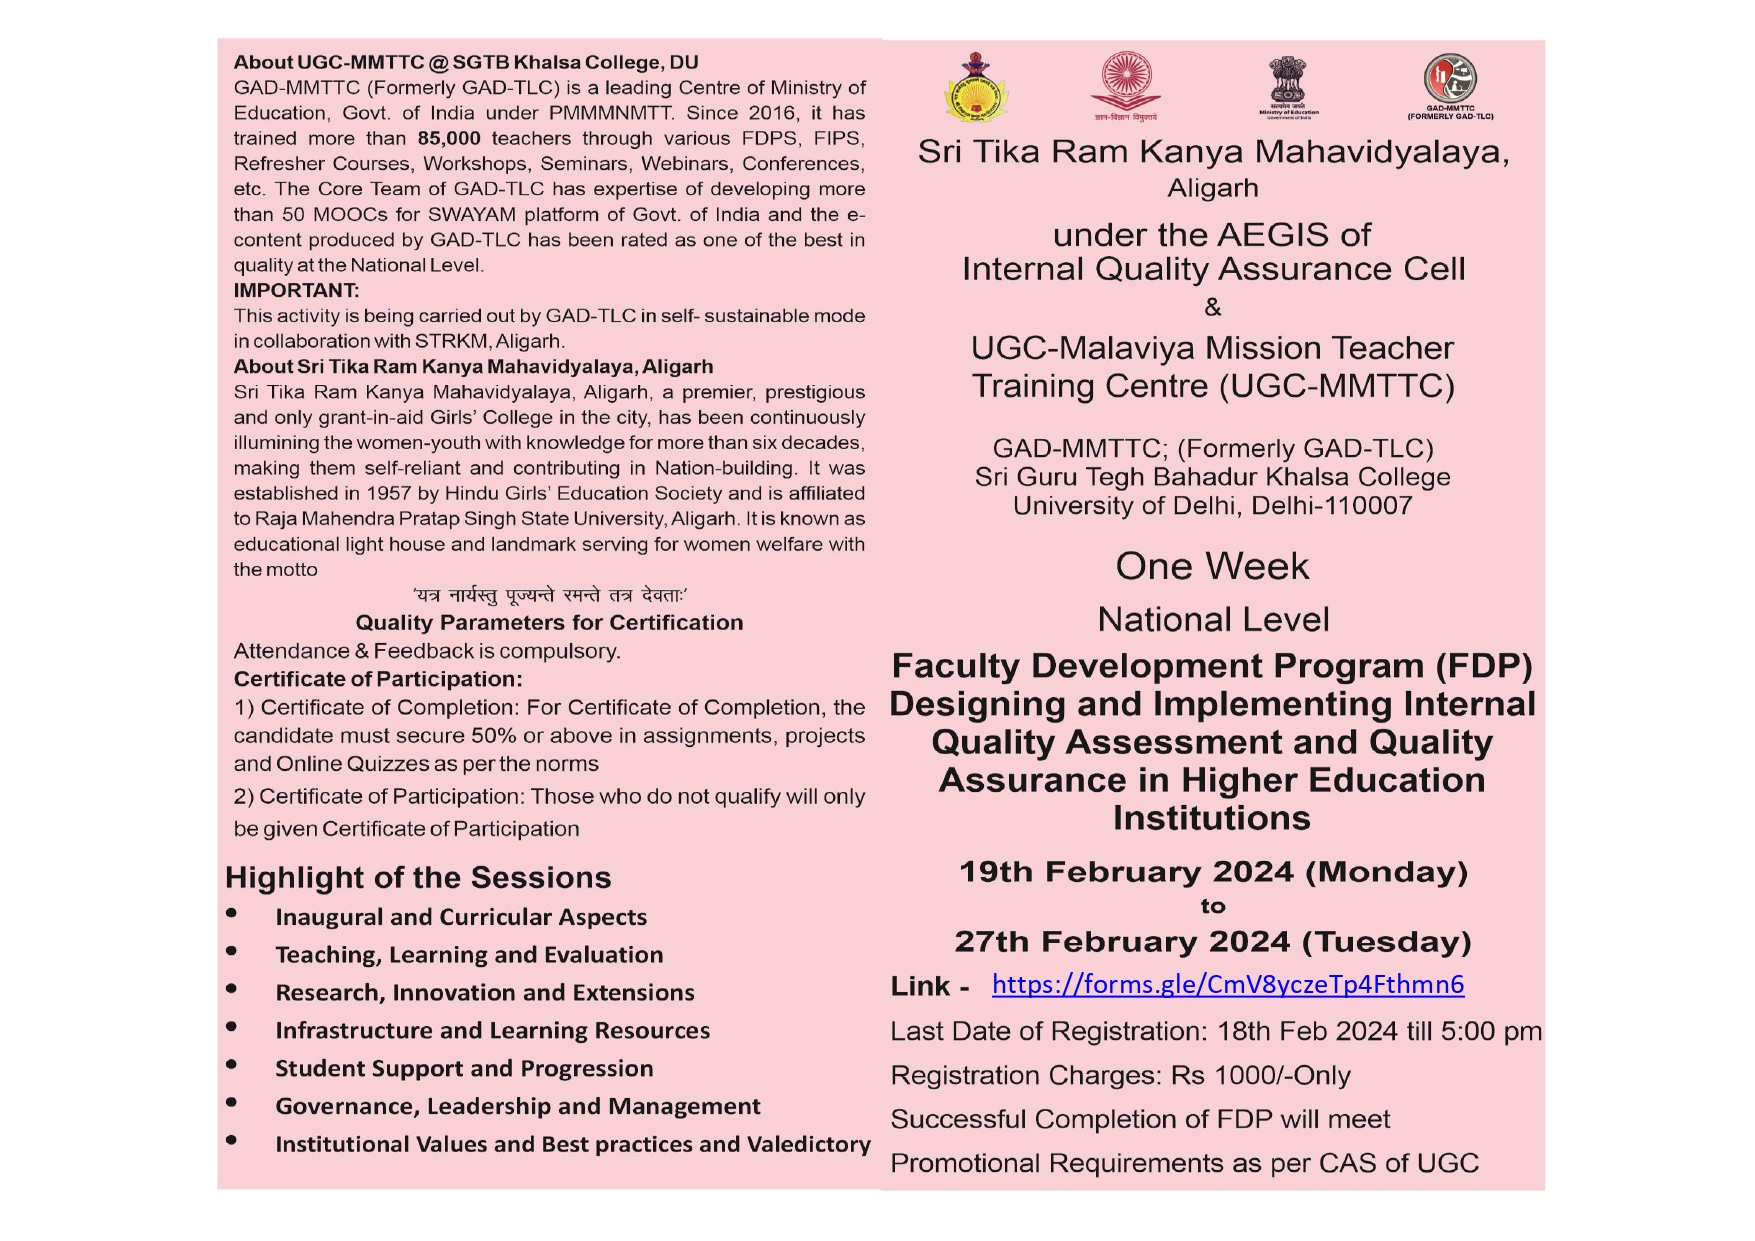 Course Image OFDP-173: Designing and Implementing Internal Quality Assessment and Quality Assurance in Higher Education Institutions